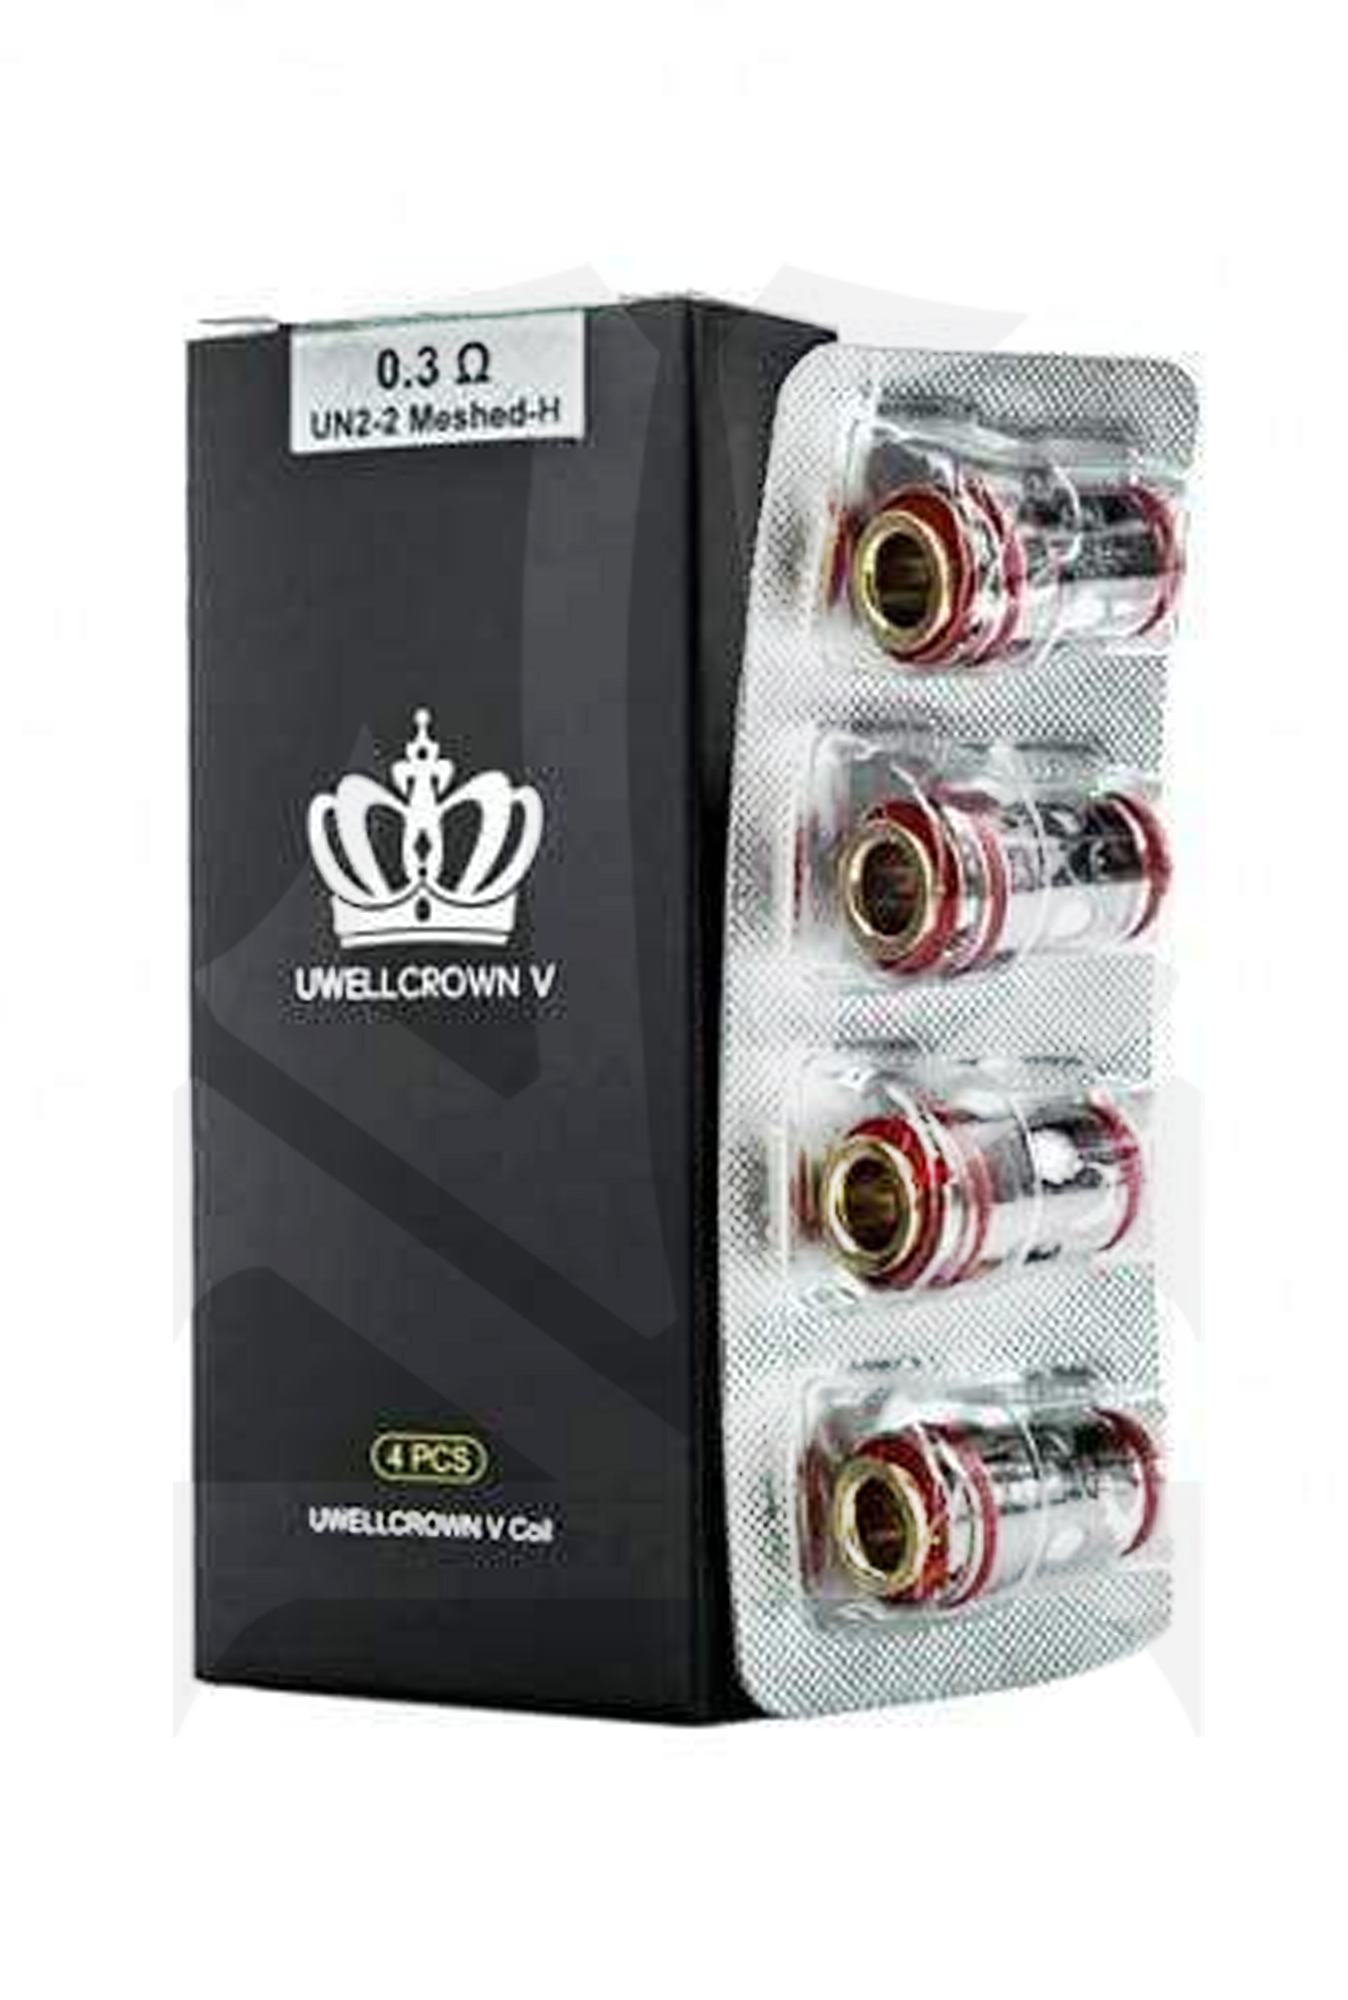 uWell Crown 5 Coils